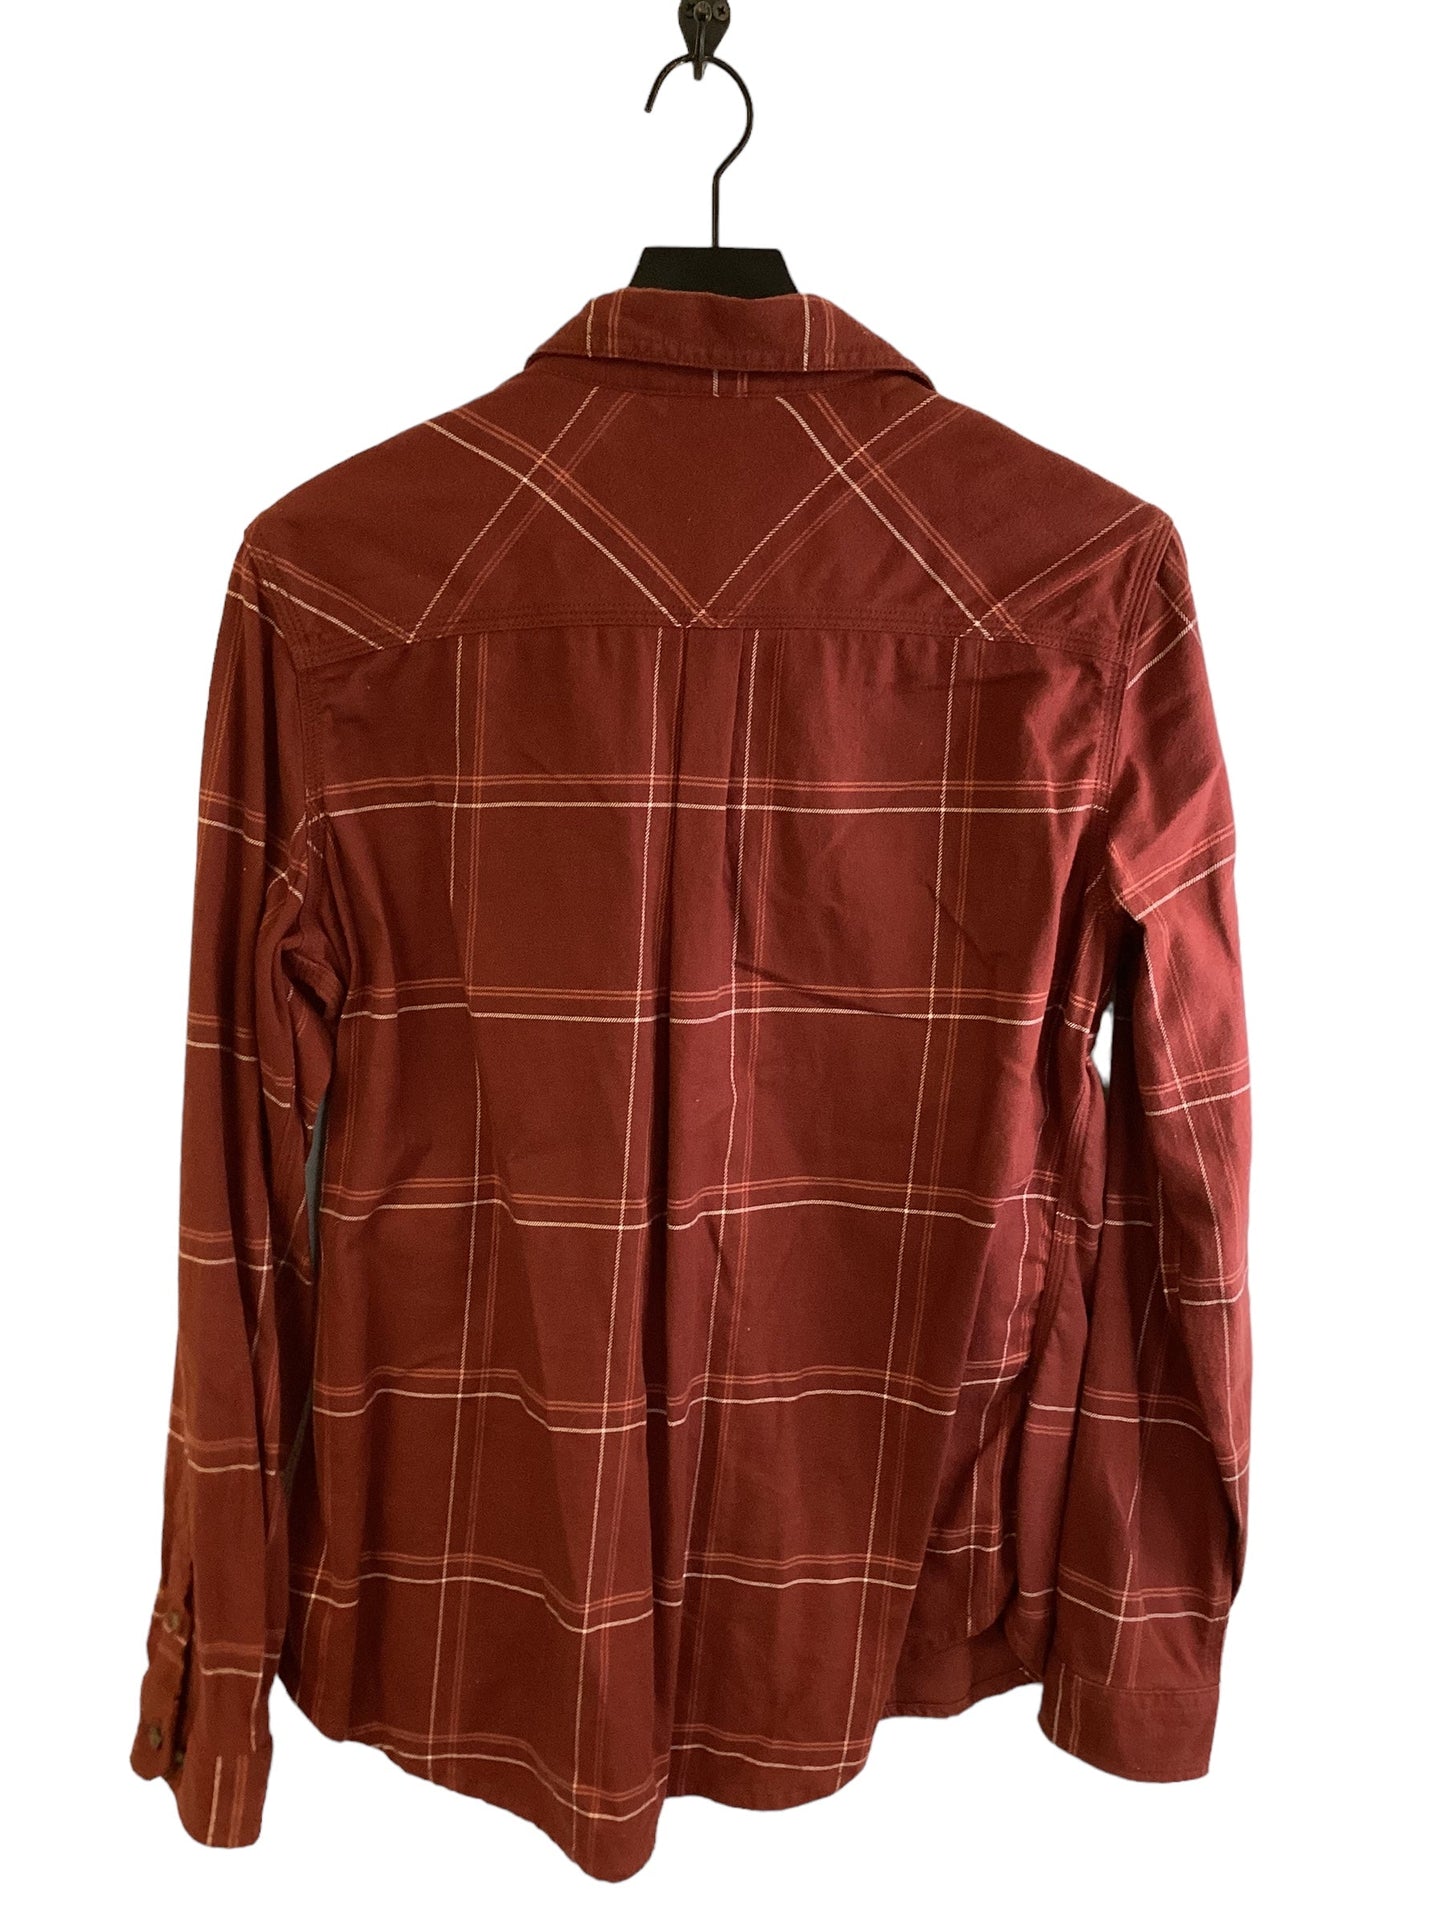 Blouse Long Sleeve By Carhart  Size: L